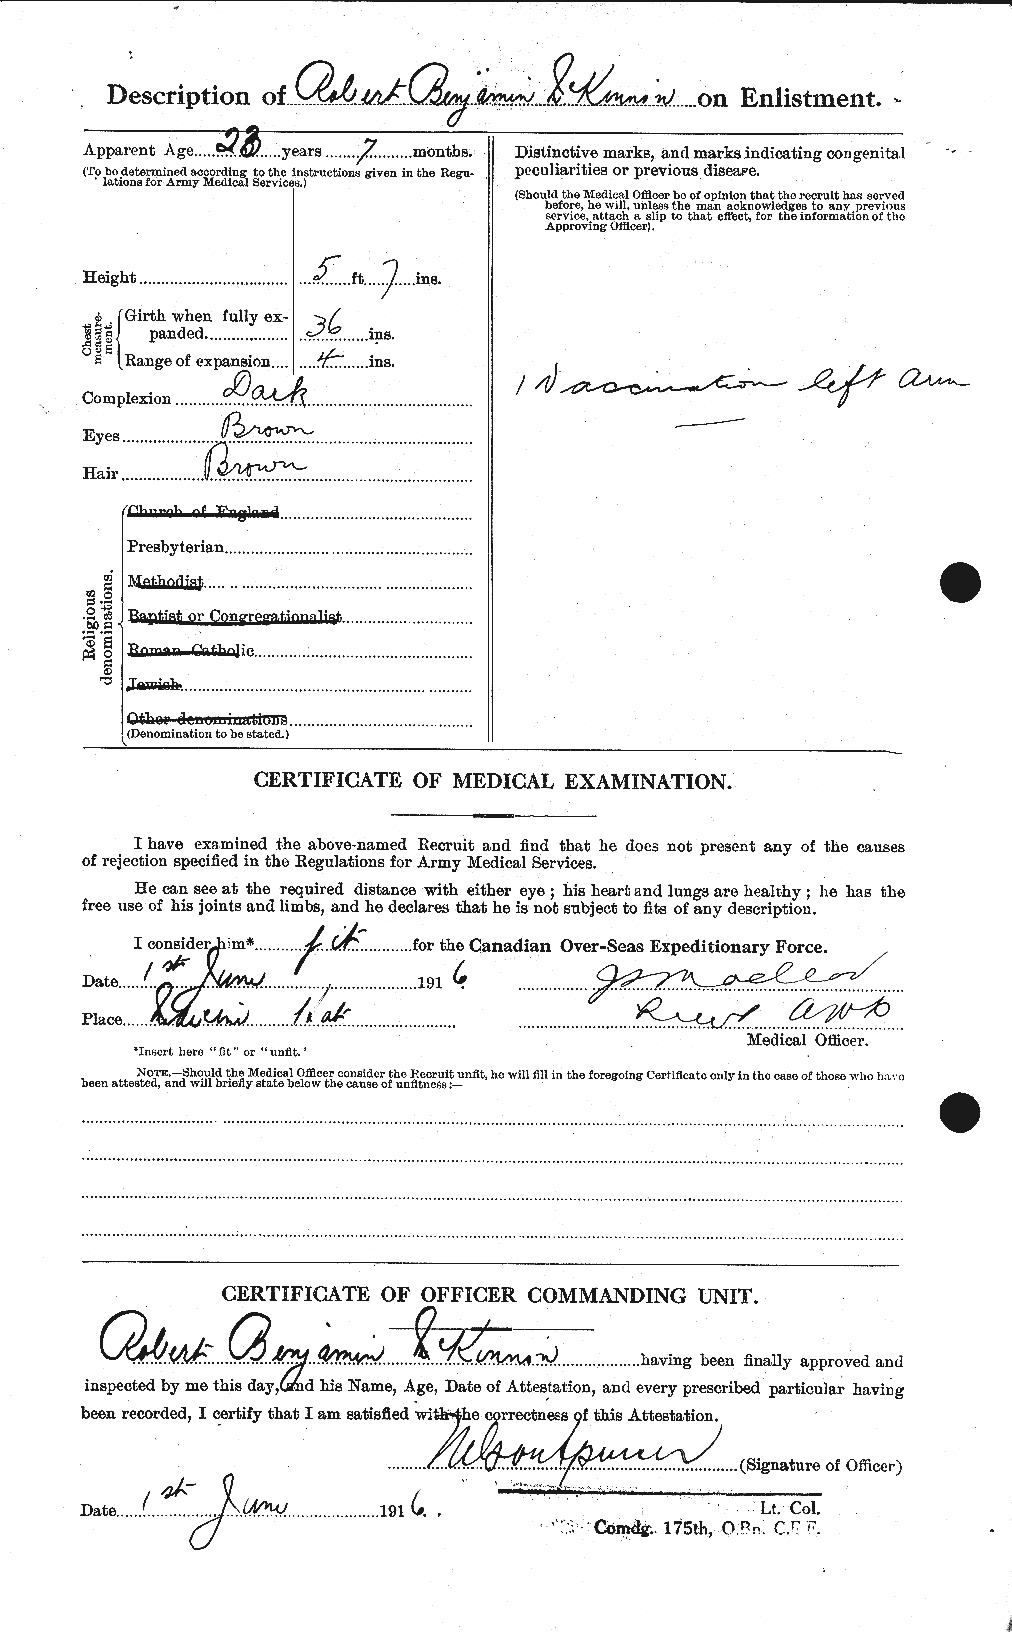 Personnel Records of the First World War - CEF 534243b